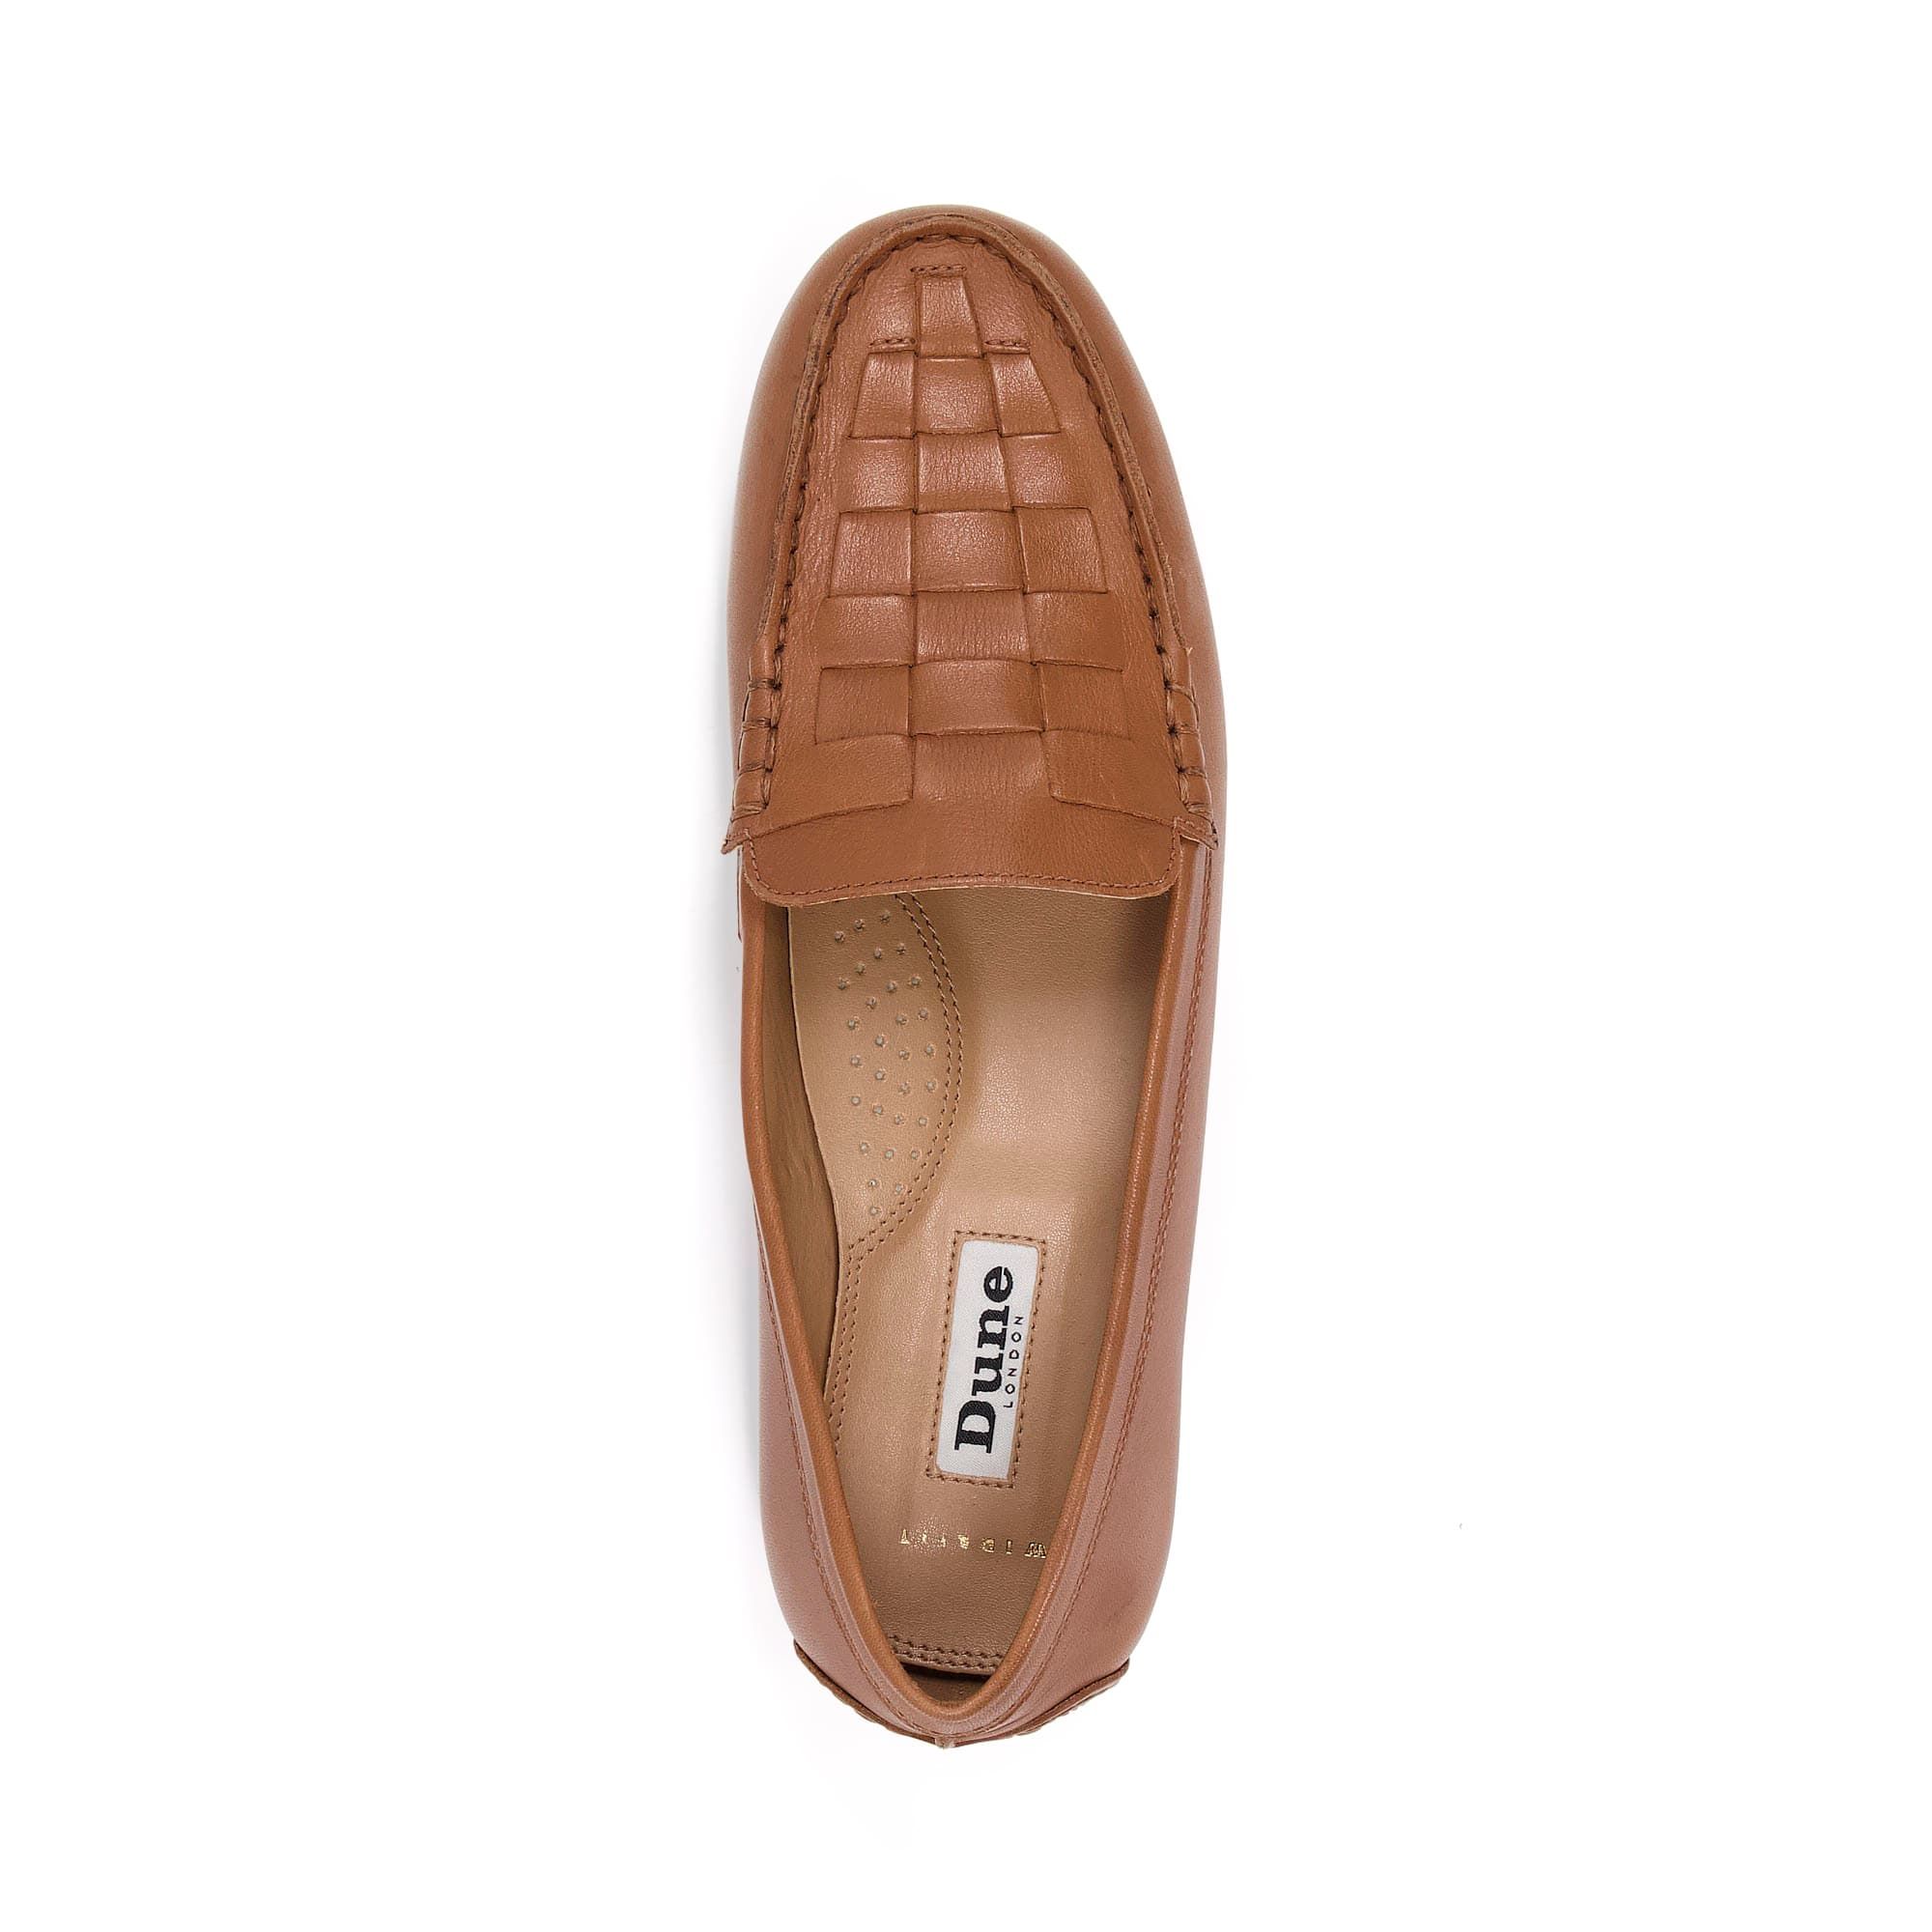 Meet your new easy-going style for everyday. These leather loafers are wonderfully comfortable and feature on-trend woven details.